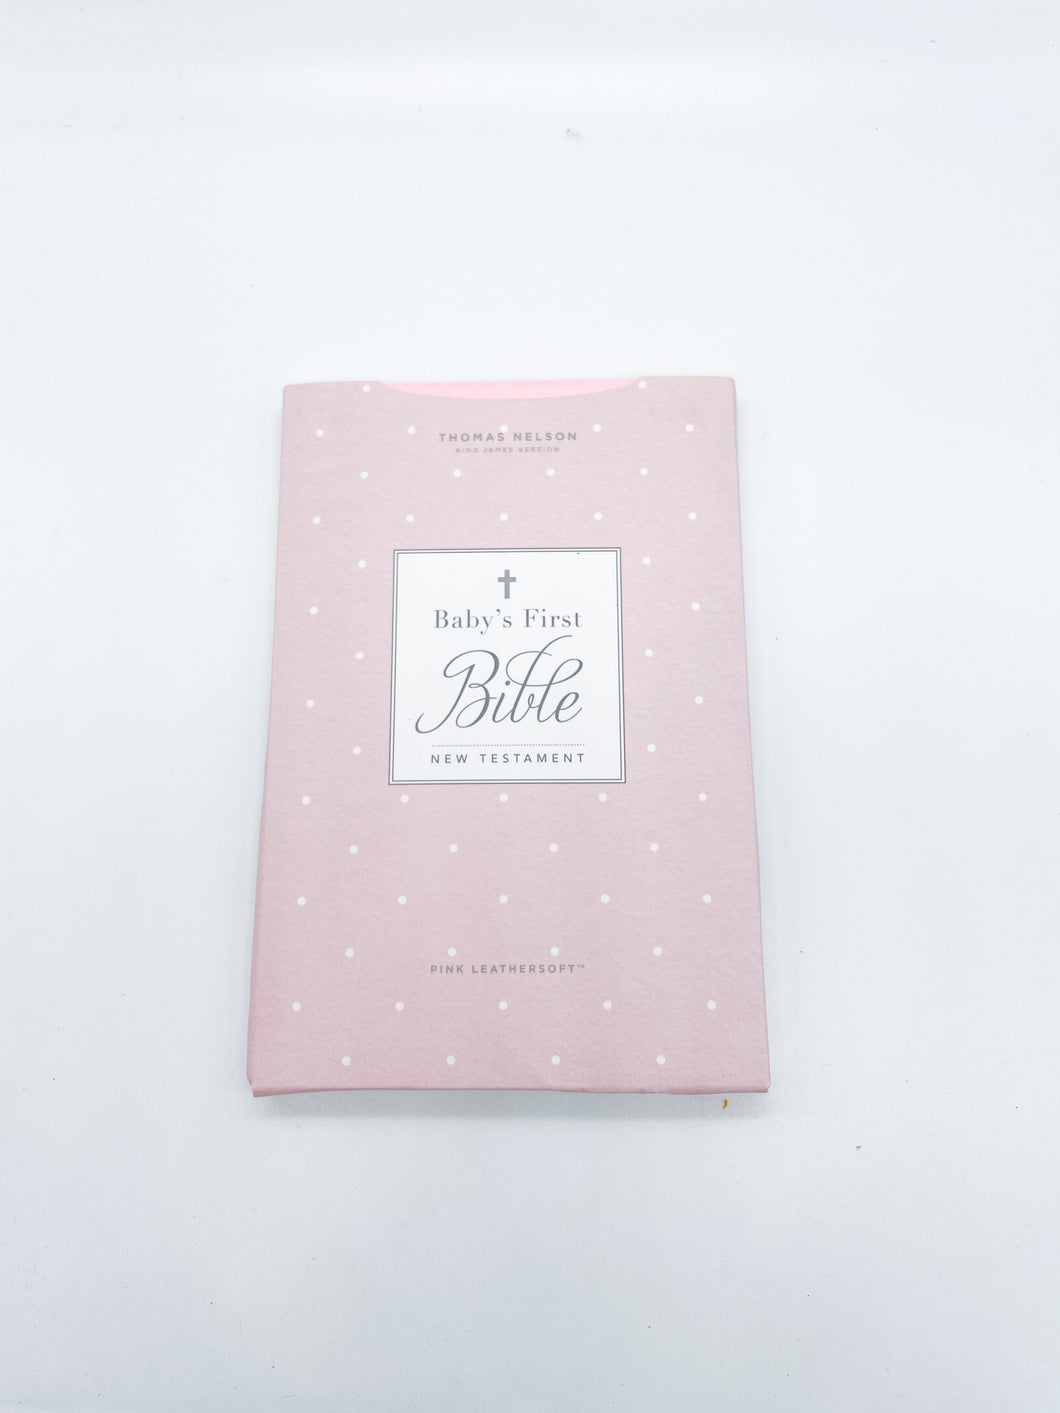 Baby's First Bible New Testament Pink